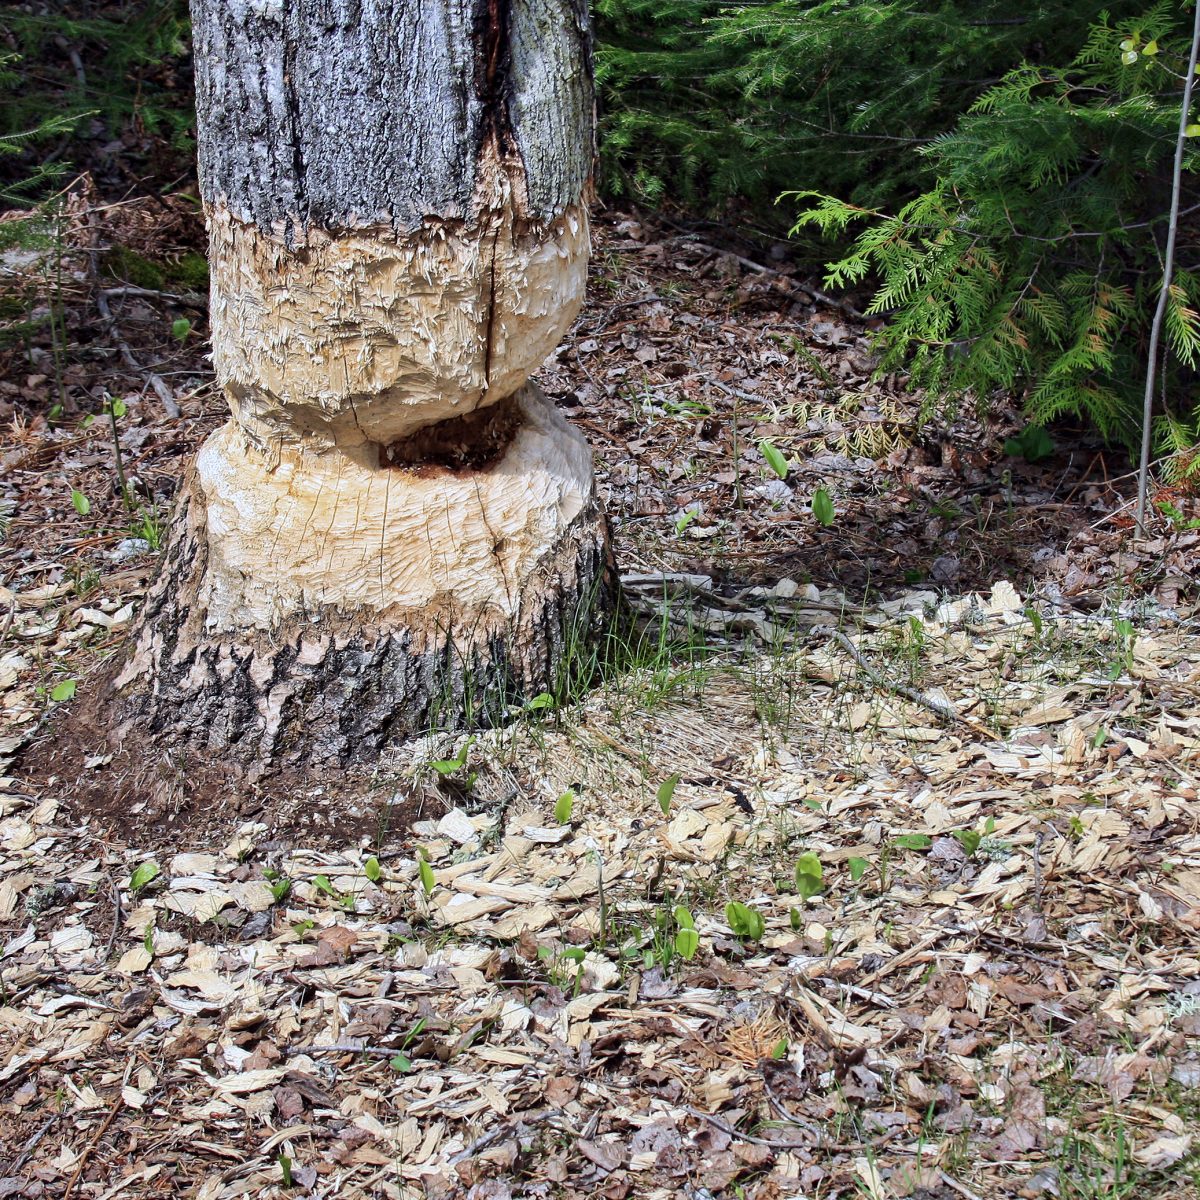 Beever work - tree chewed by a beaver in the forest